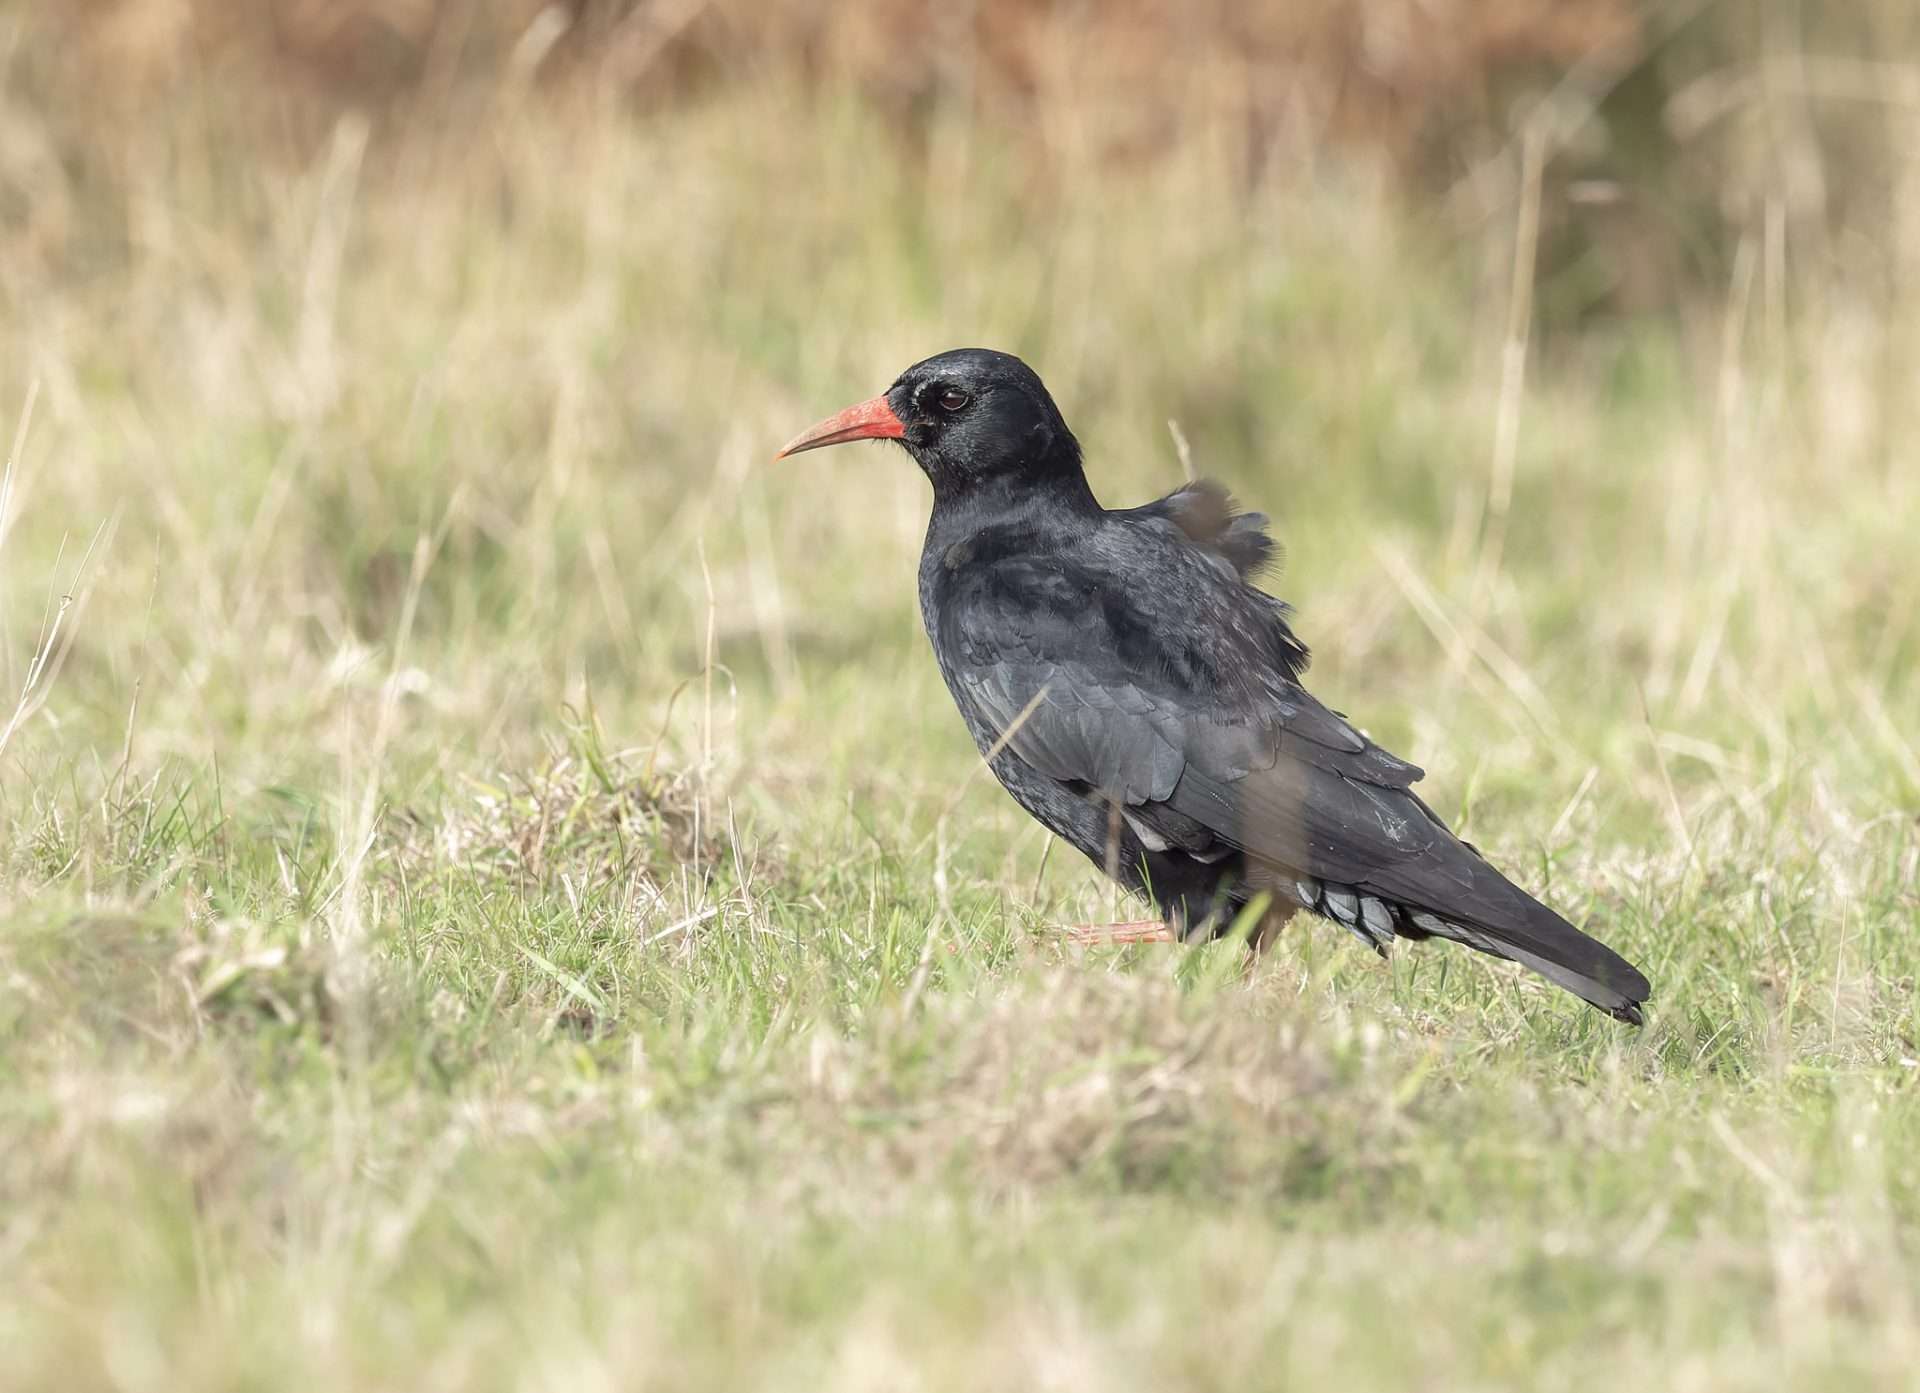 Chough by Fleming at Gammon Head